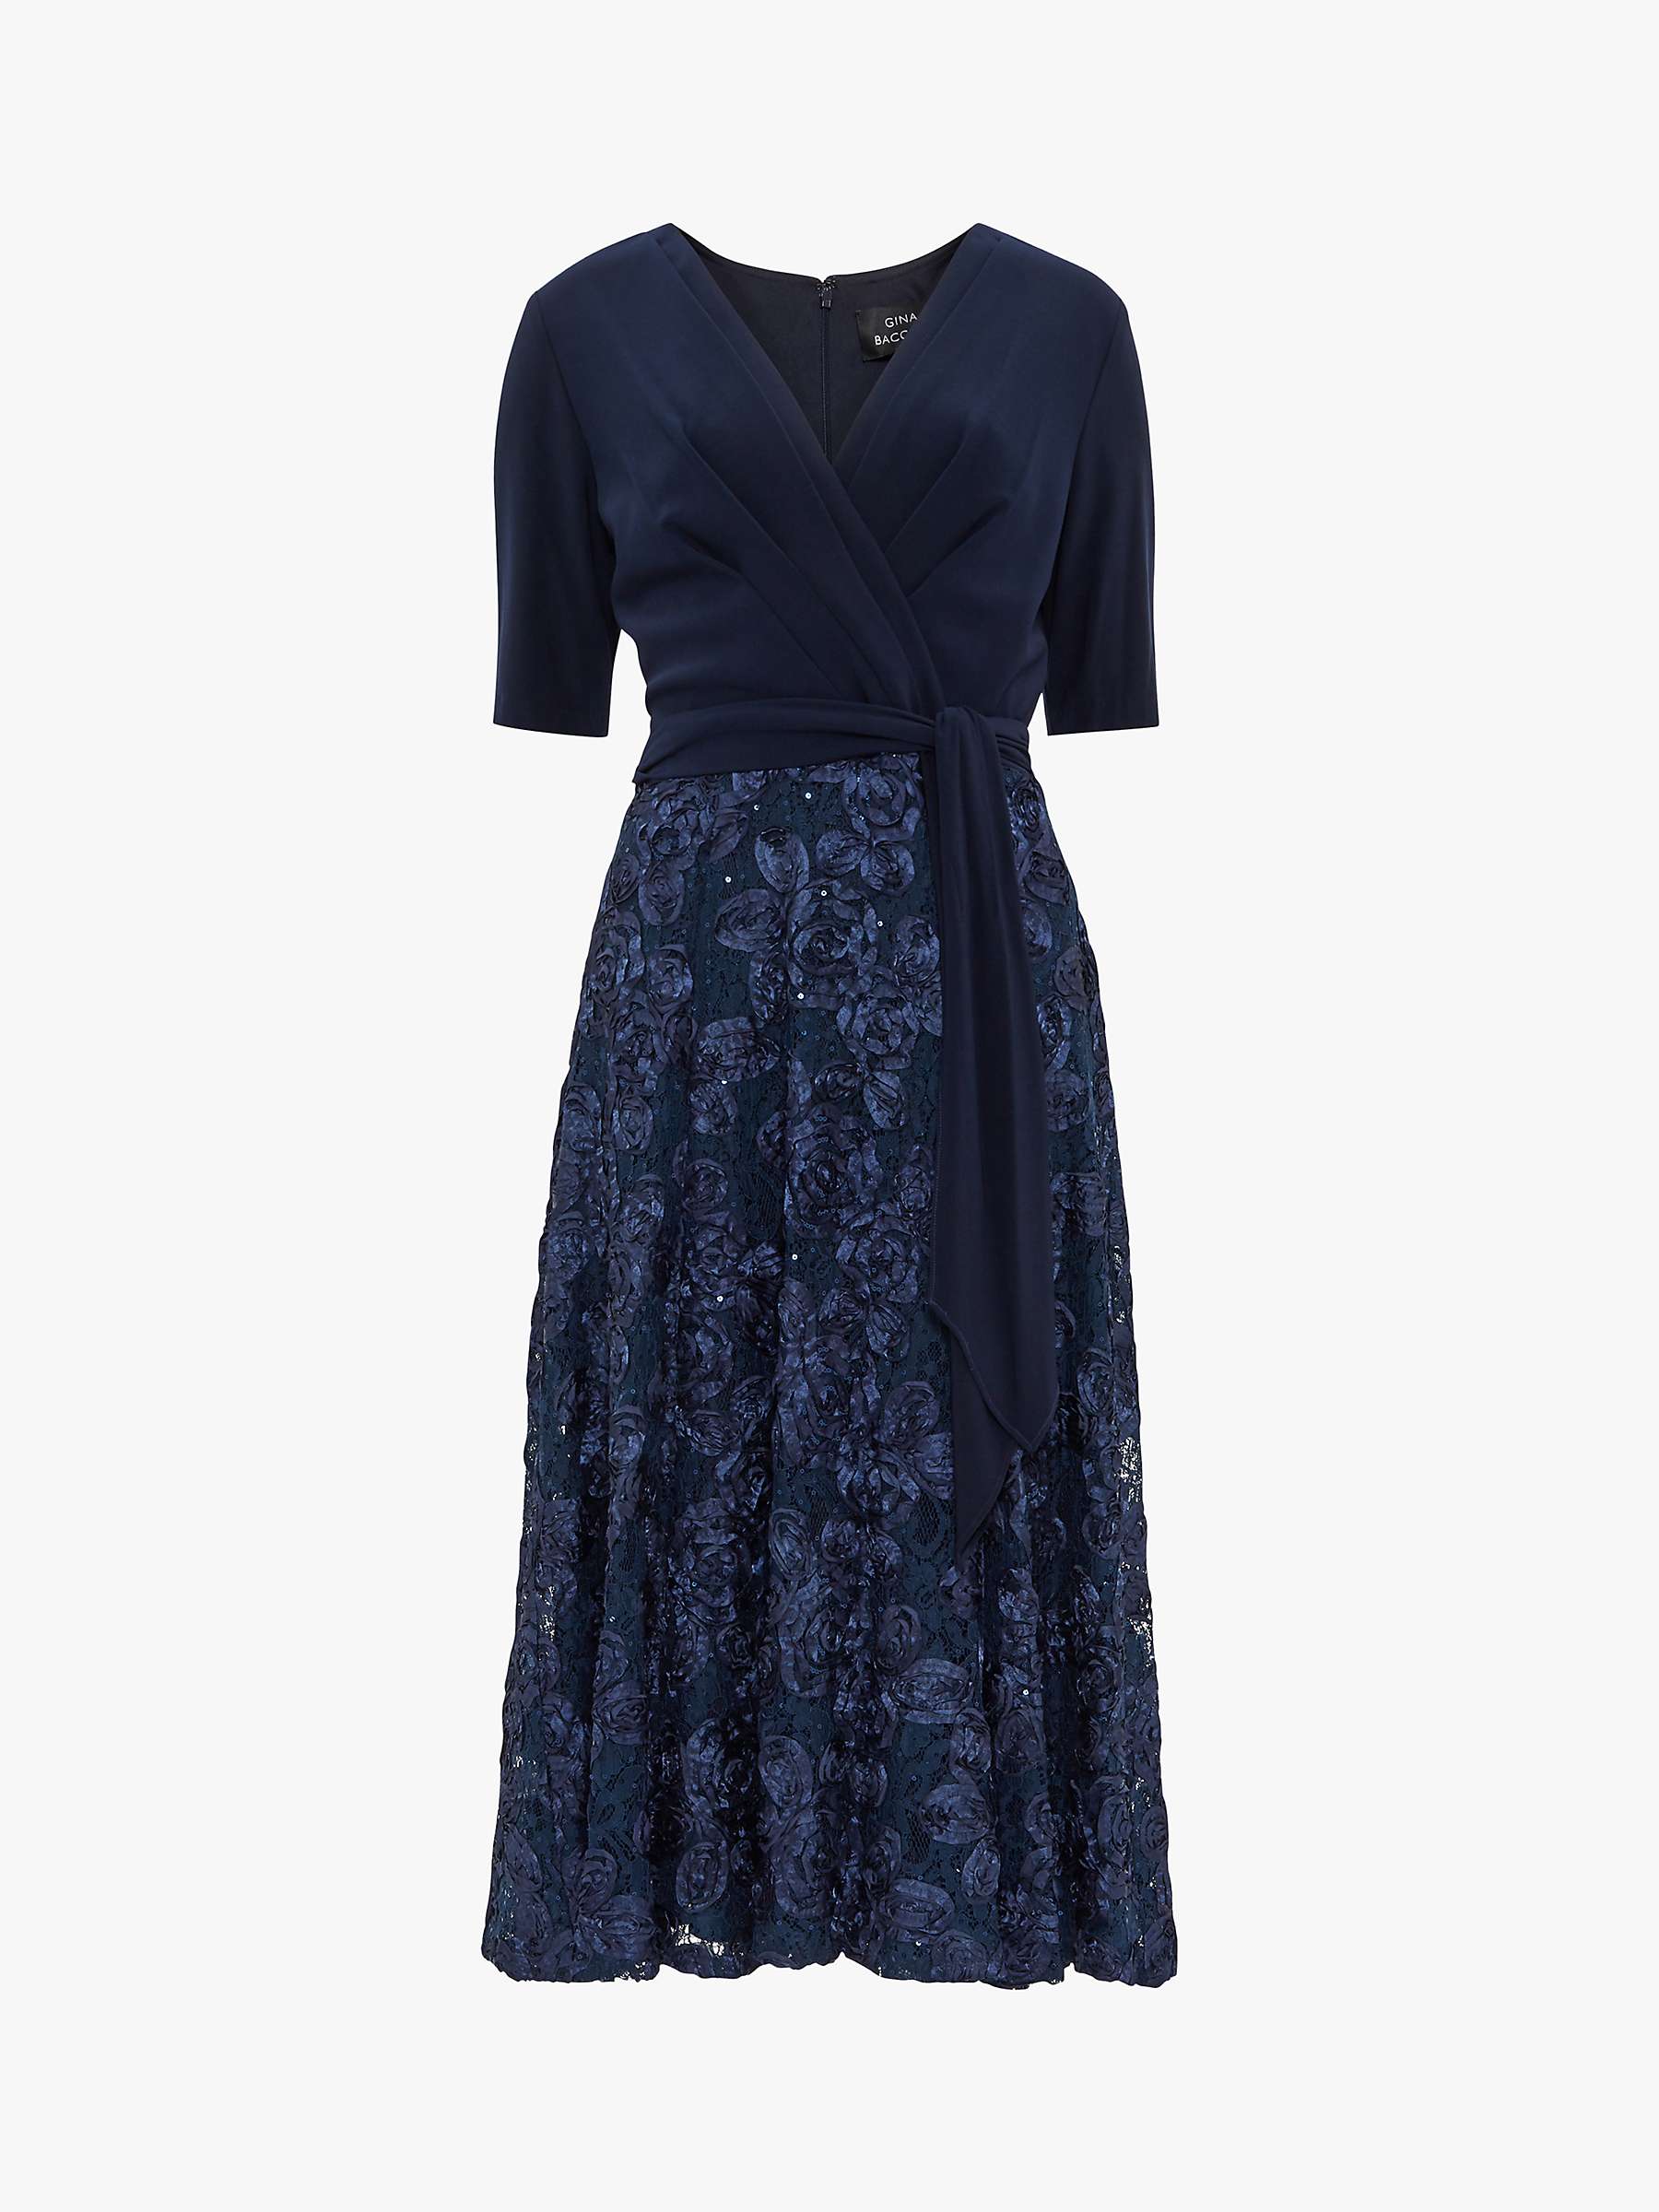 Buy Gina Bacconi Robina Sequin Lace Dress, Spring Navy Online at johnlewis.com